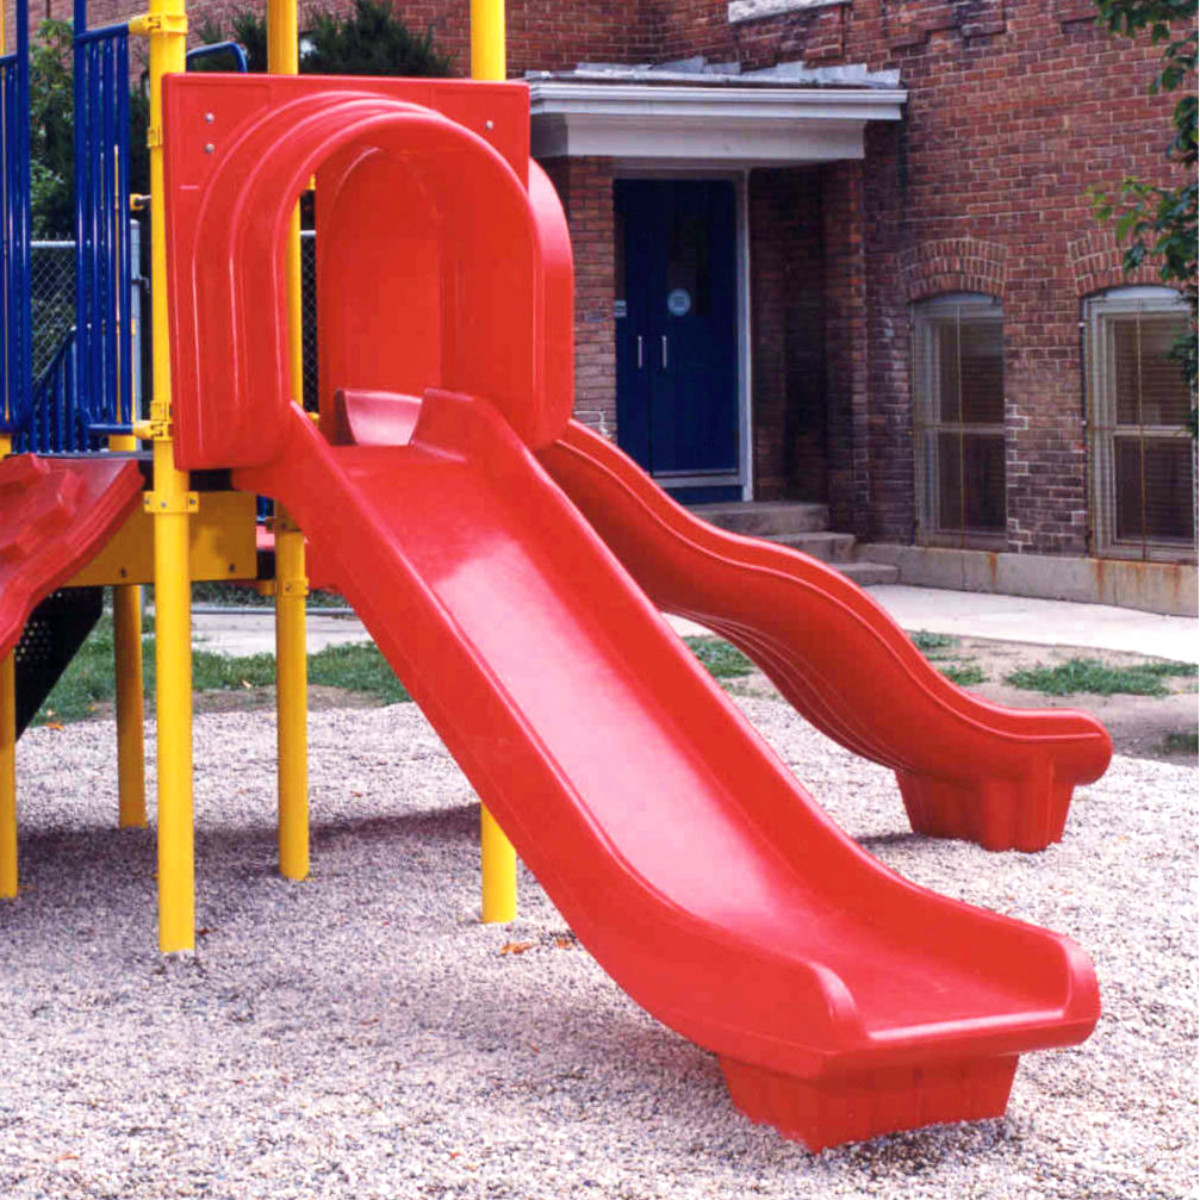 3-5' Commercial Single Bedway Playground Slide